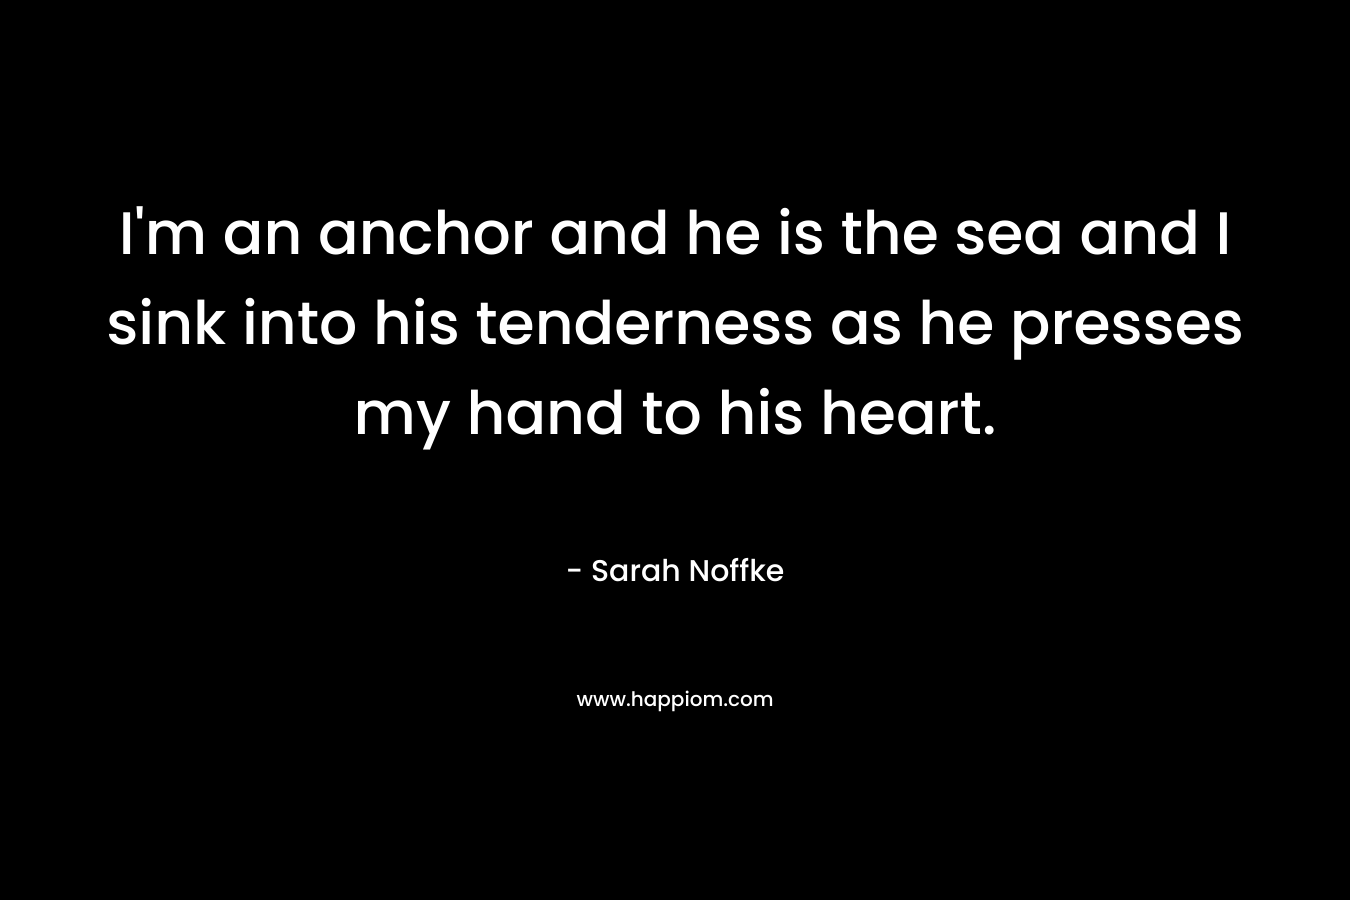 I'm an anchor and he is the sea and I sink into his tenderness as he presses my hand to his heart.